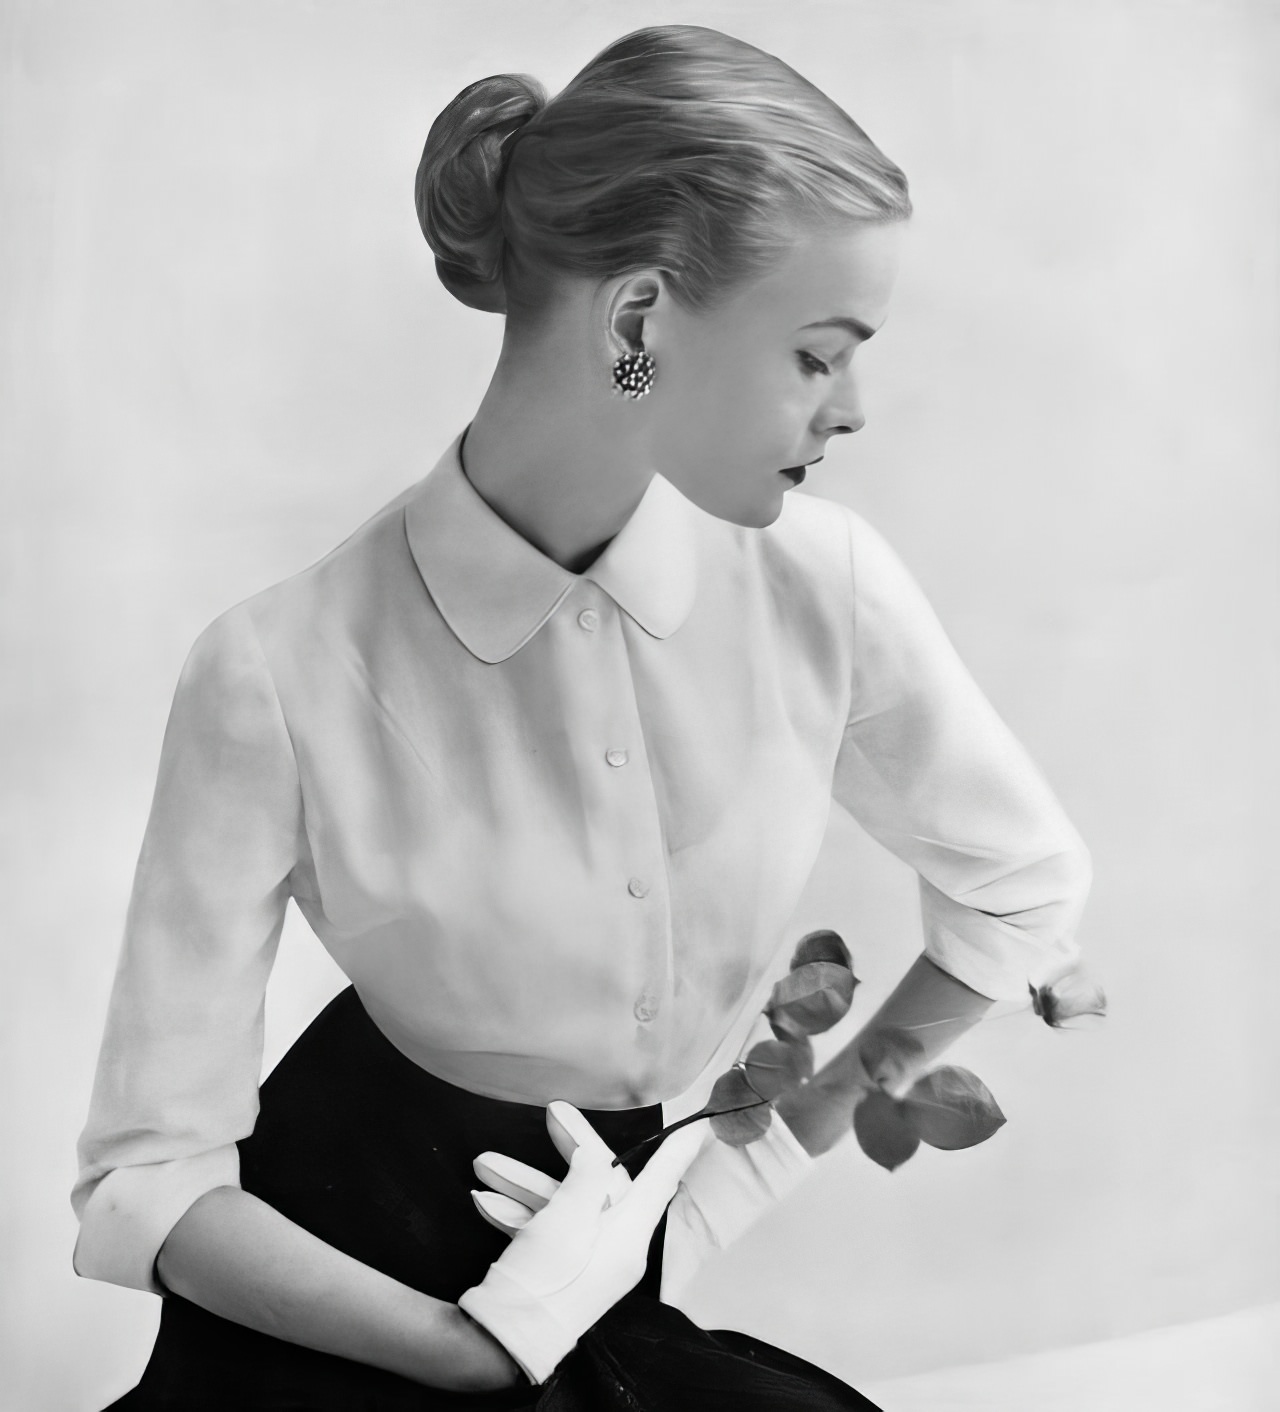 Susan Abraham in a Swiss voile blouse with a stiff collar and fly-away cuffs, 1951.